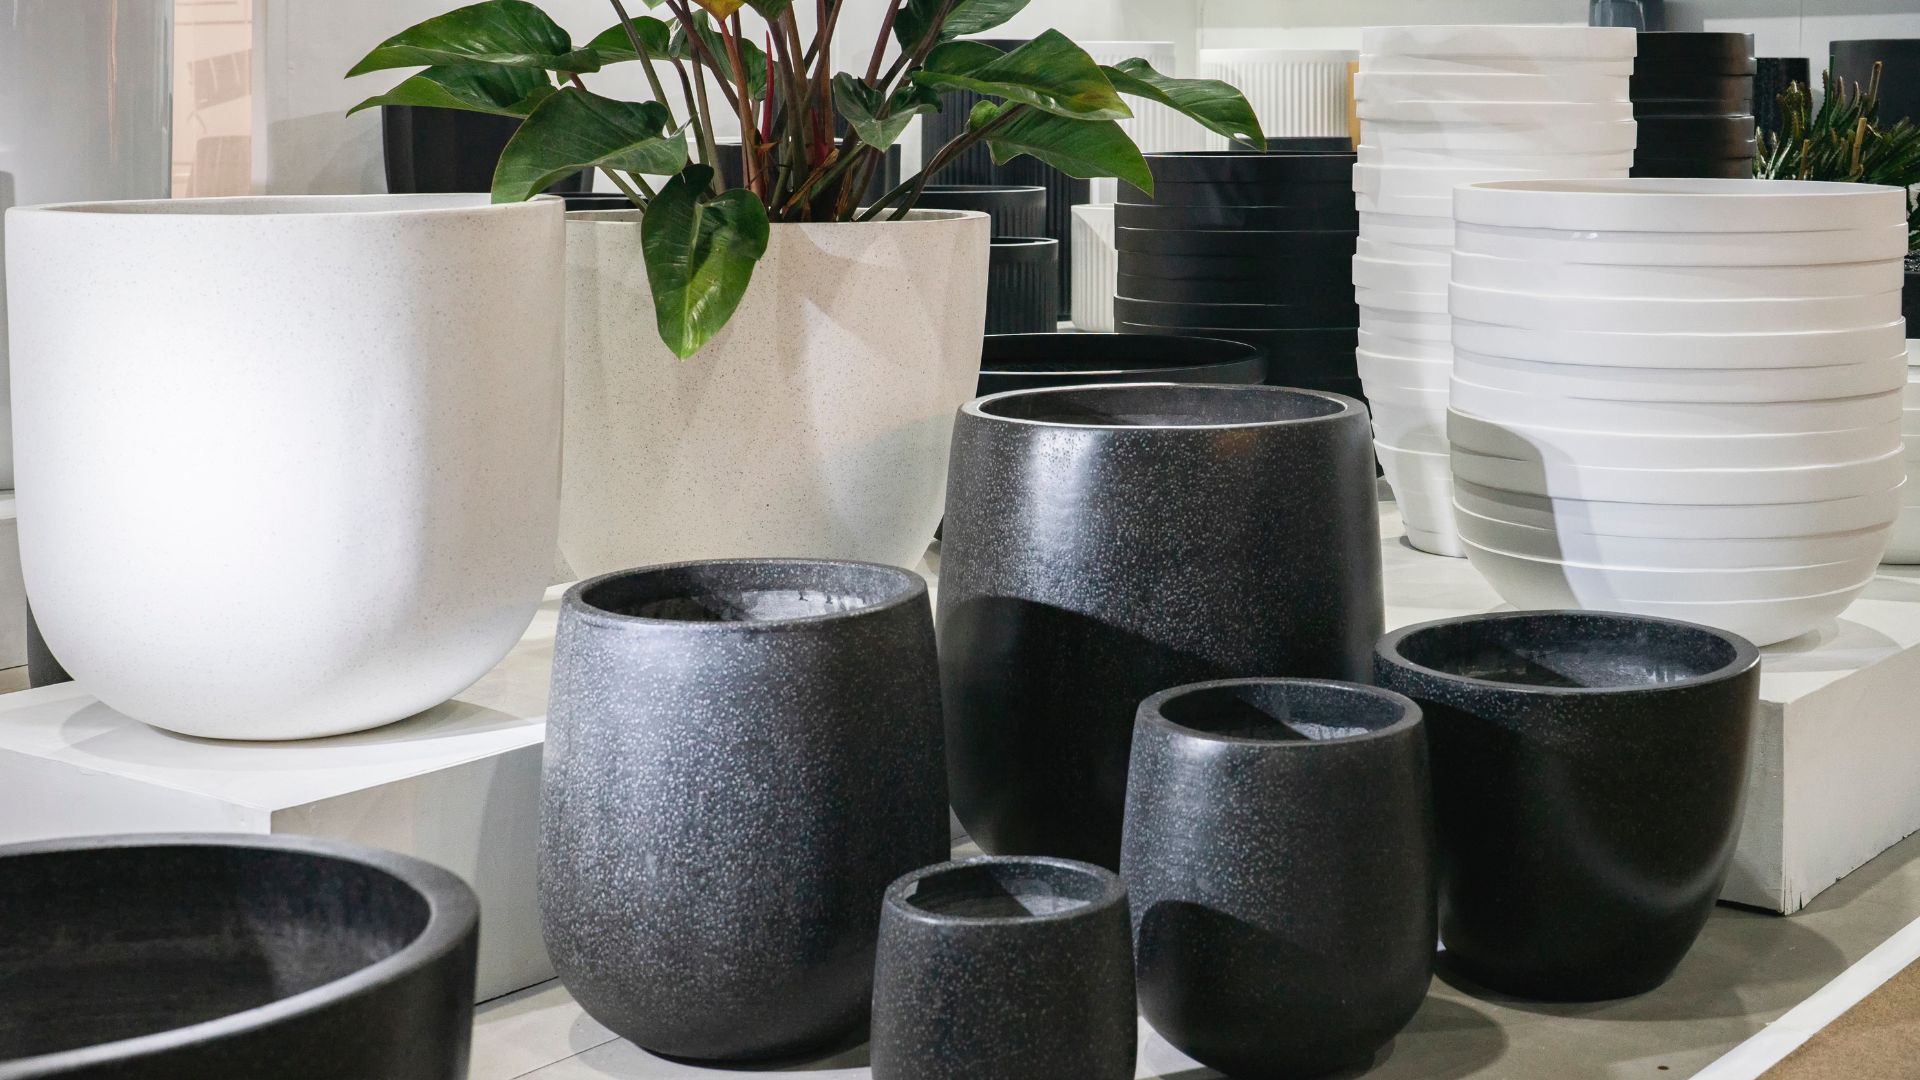 picture of black and white cermaic plant pots on display